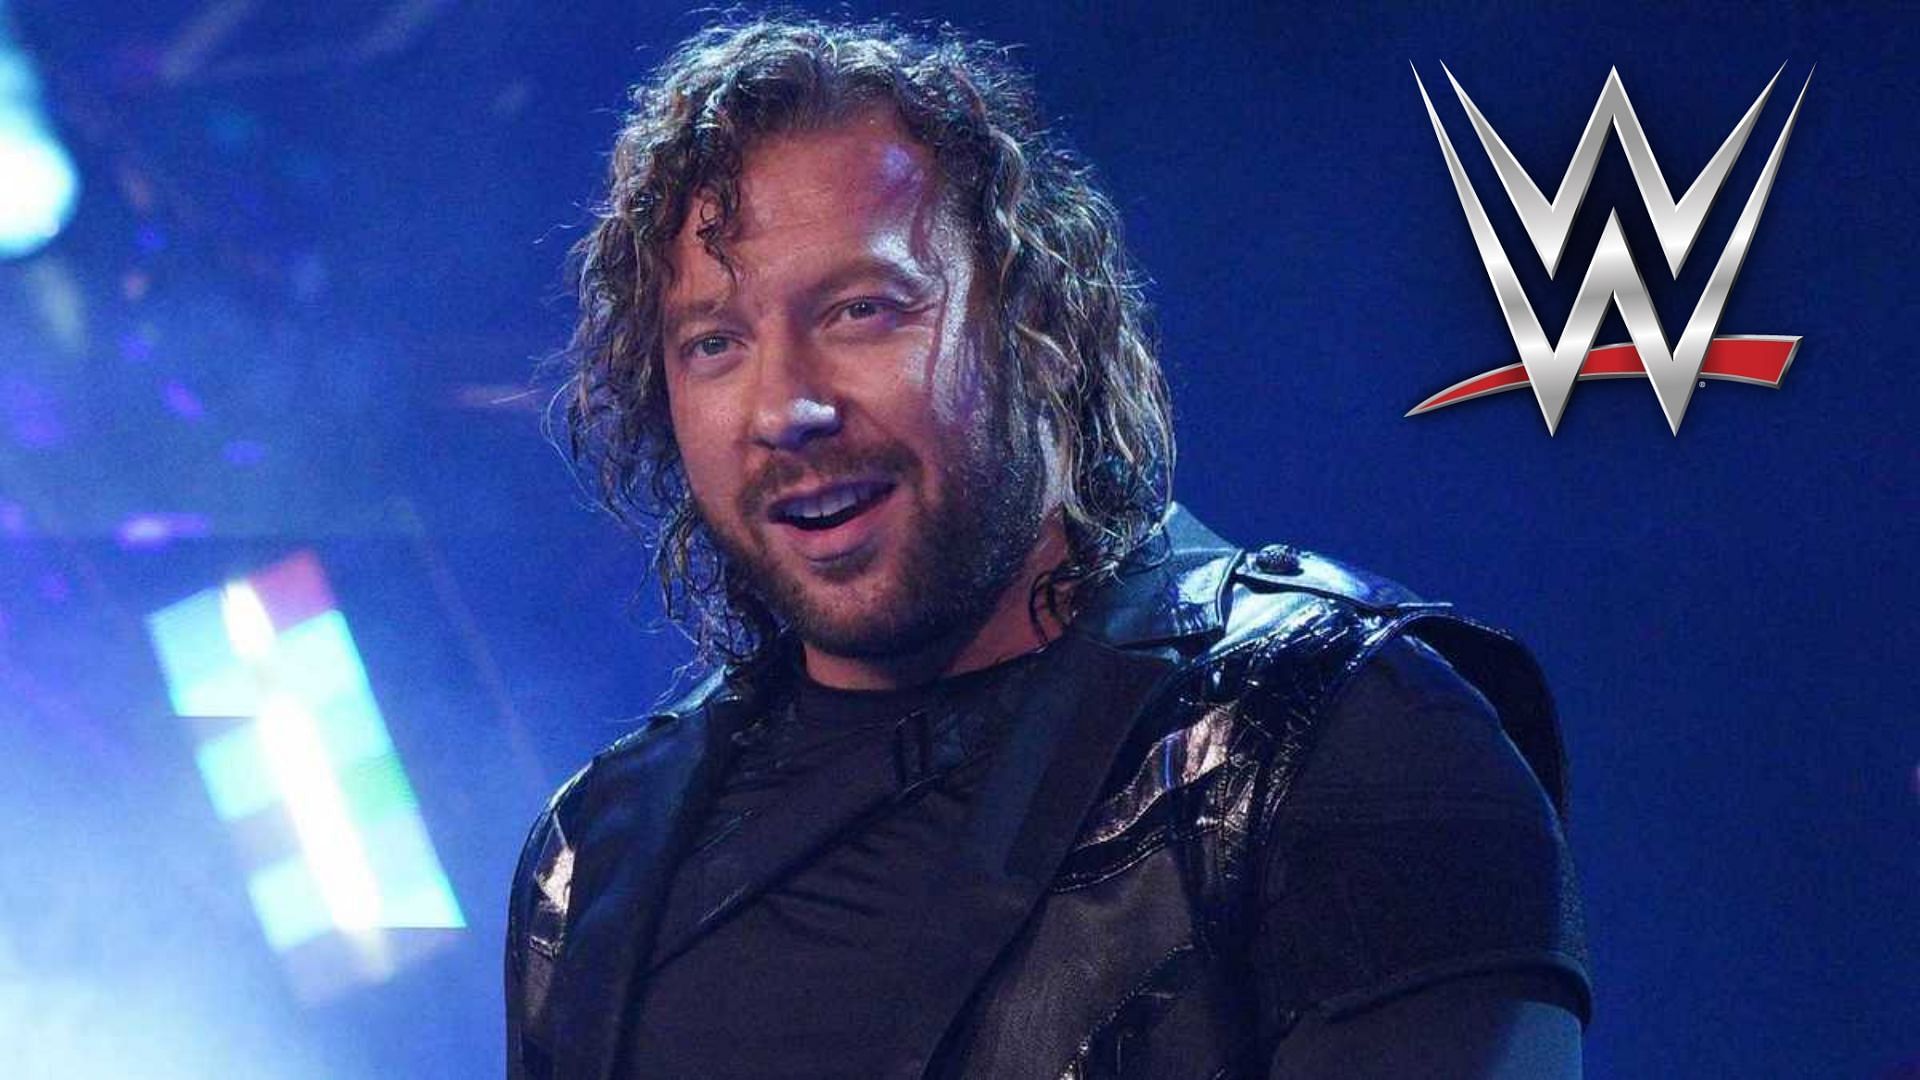 Kenny Omega is currently one-third of the AEW Trios Champions